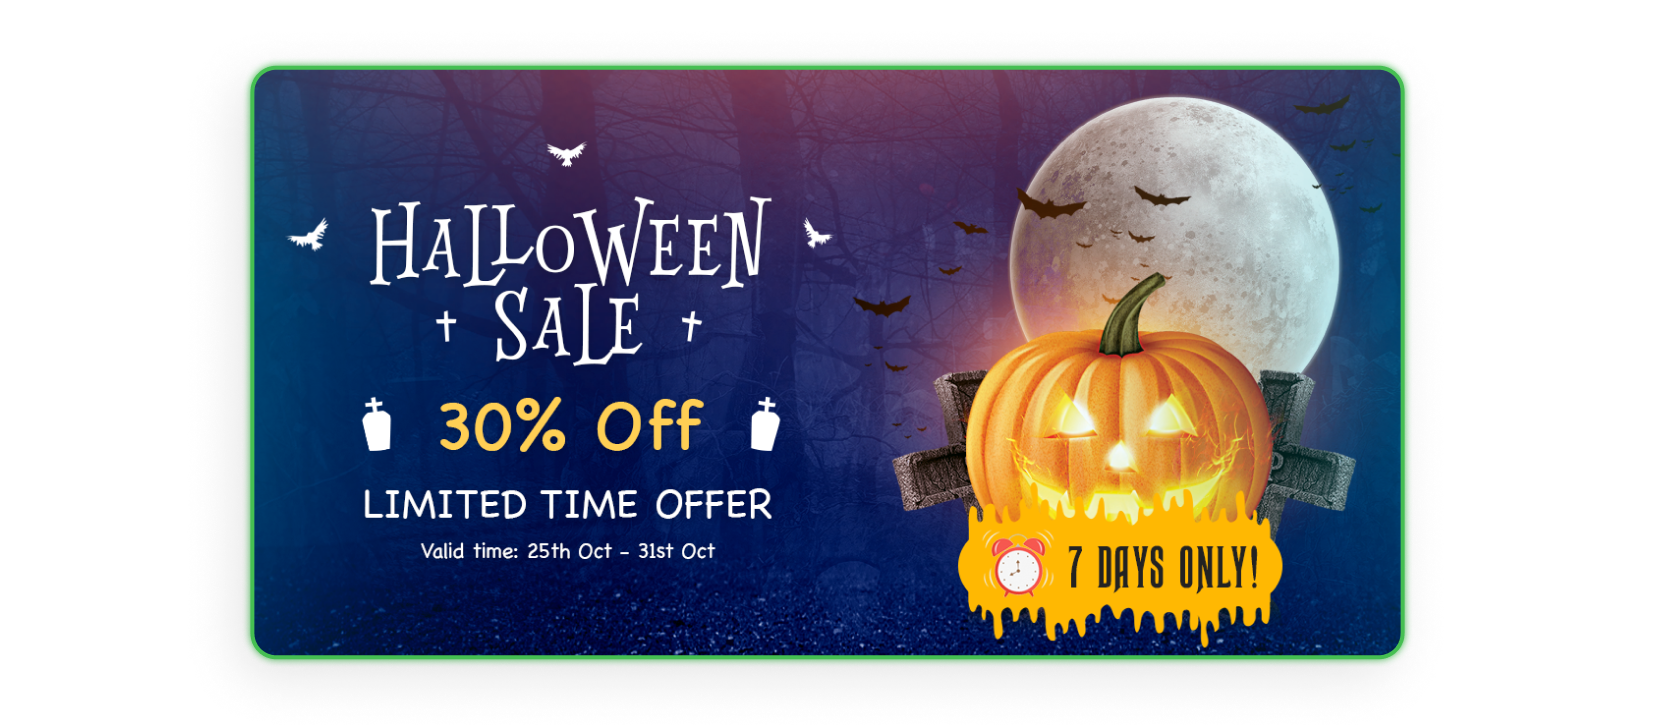 Example of a Halloween promotion